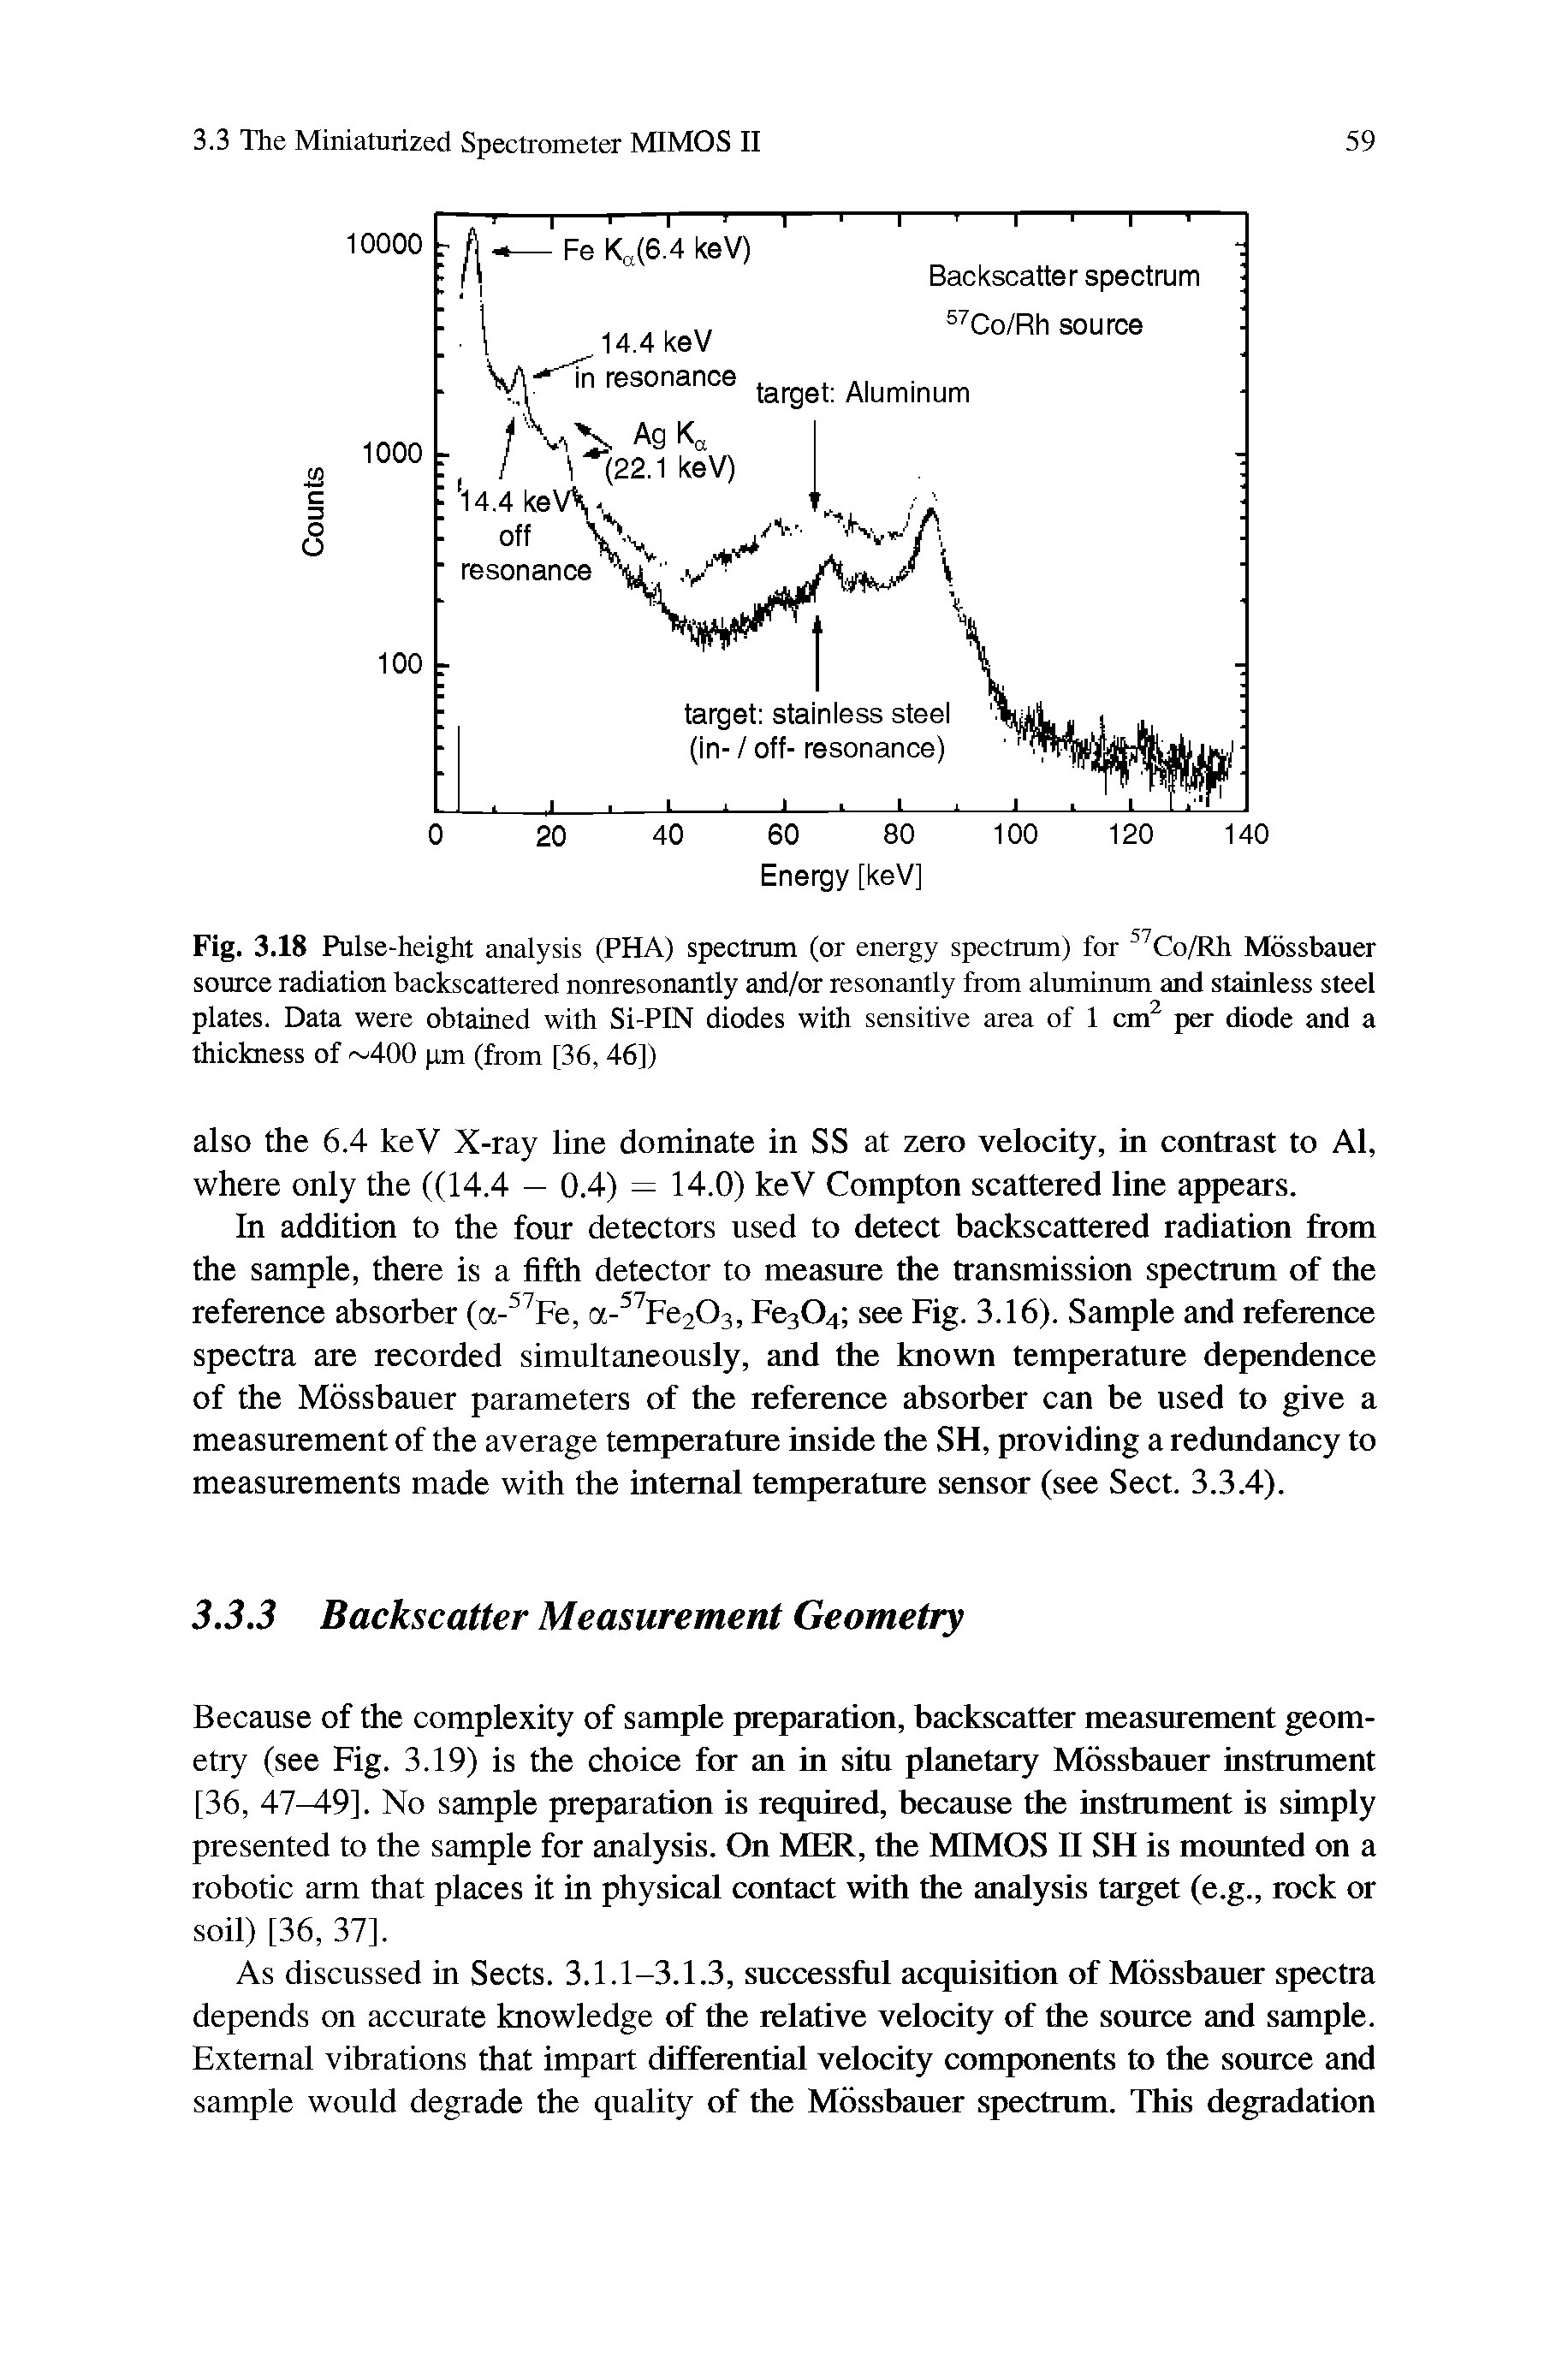 Fig. 3.18 Pulse-height analysis (PHA) spectrum (or energy spectrum) for Co/Rh Mossbauer source radiation backscattered nonresonantly and/or resonantly from aluminum and stainless steel plates. Data were obtained with Si-PIN diodes with sensitive area of 1 cm per diode and a thickness of 400 pm (from [36, 46])...